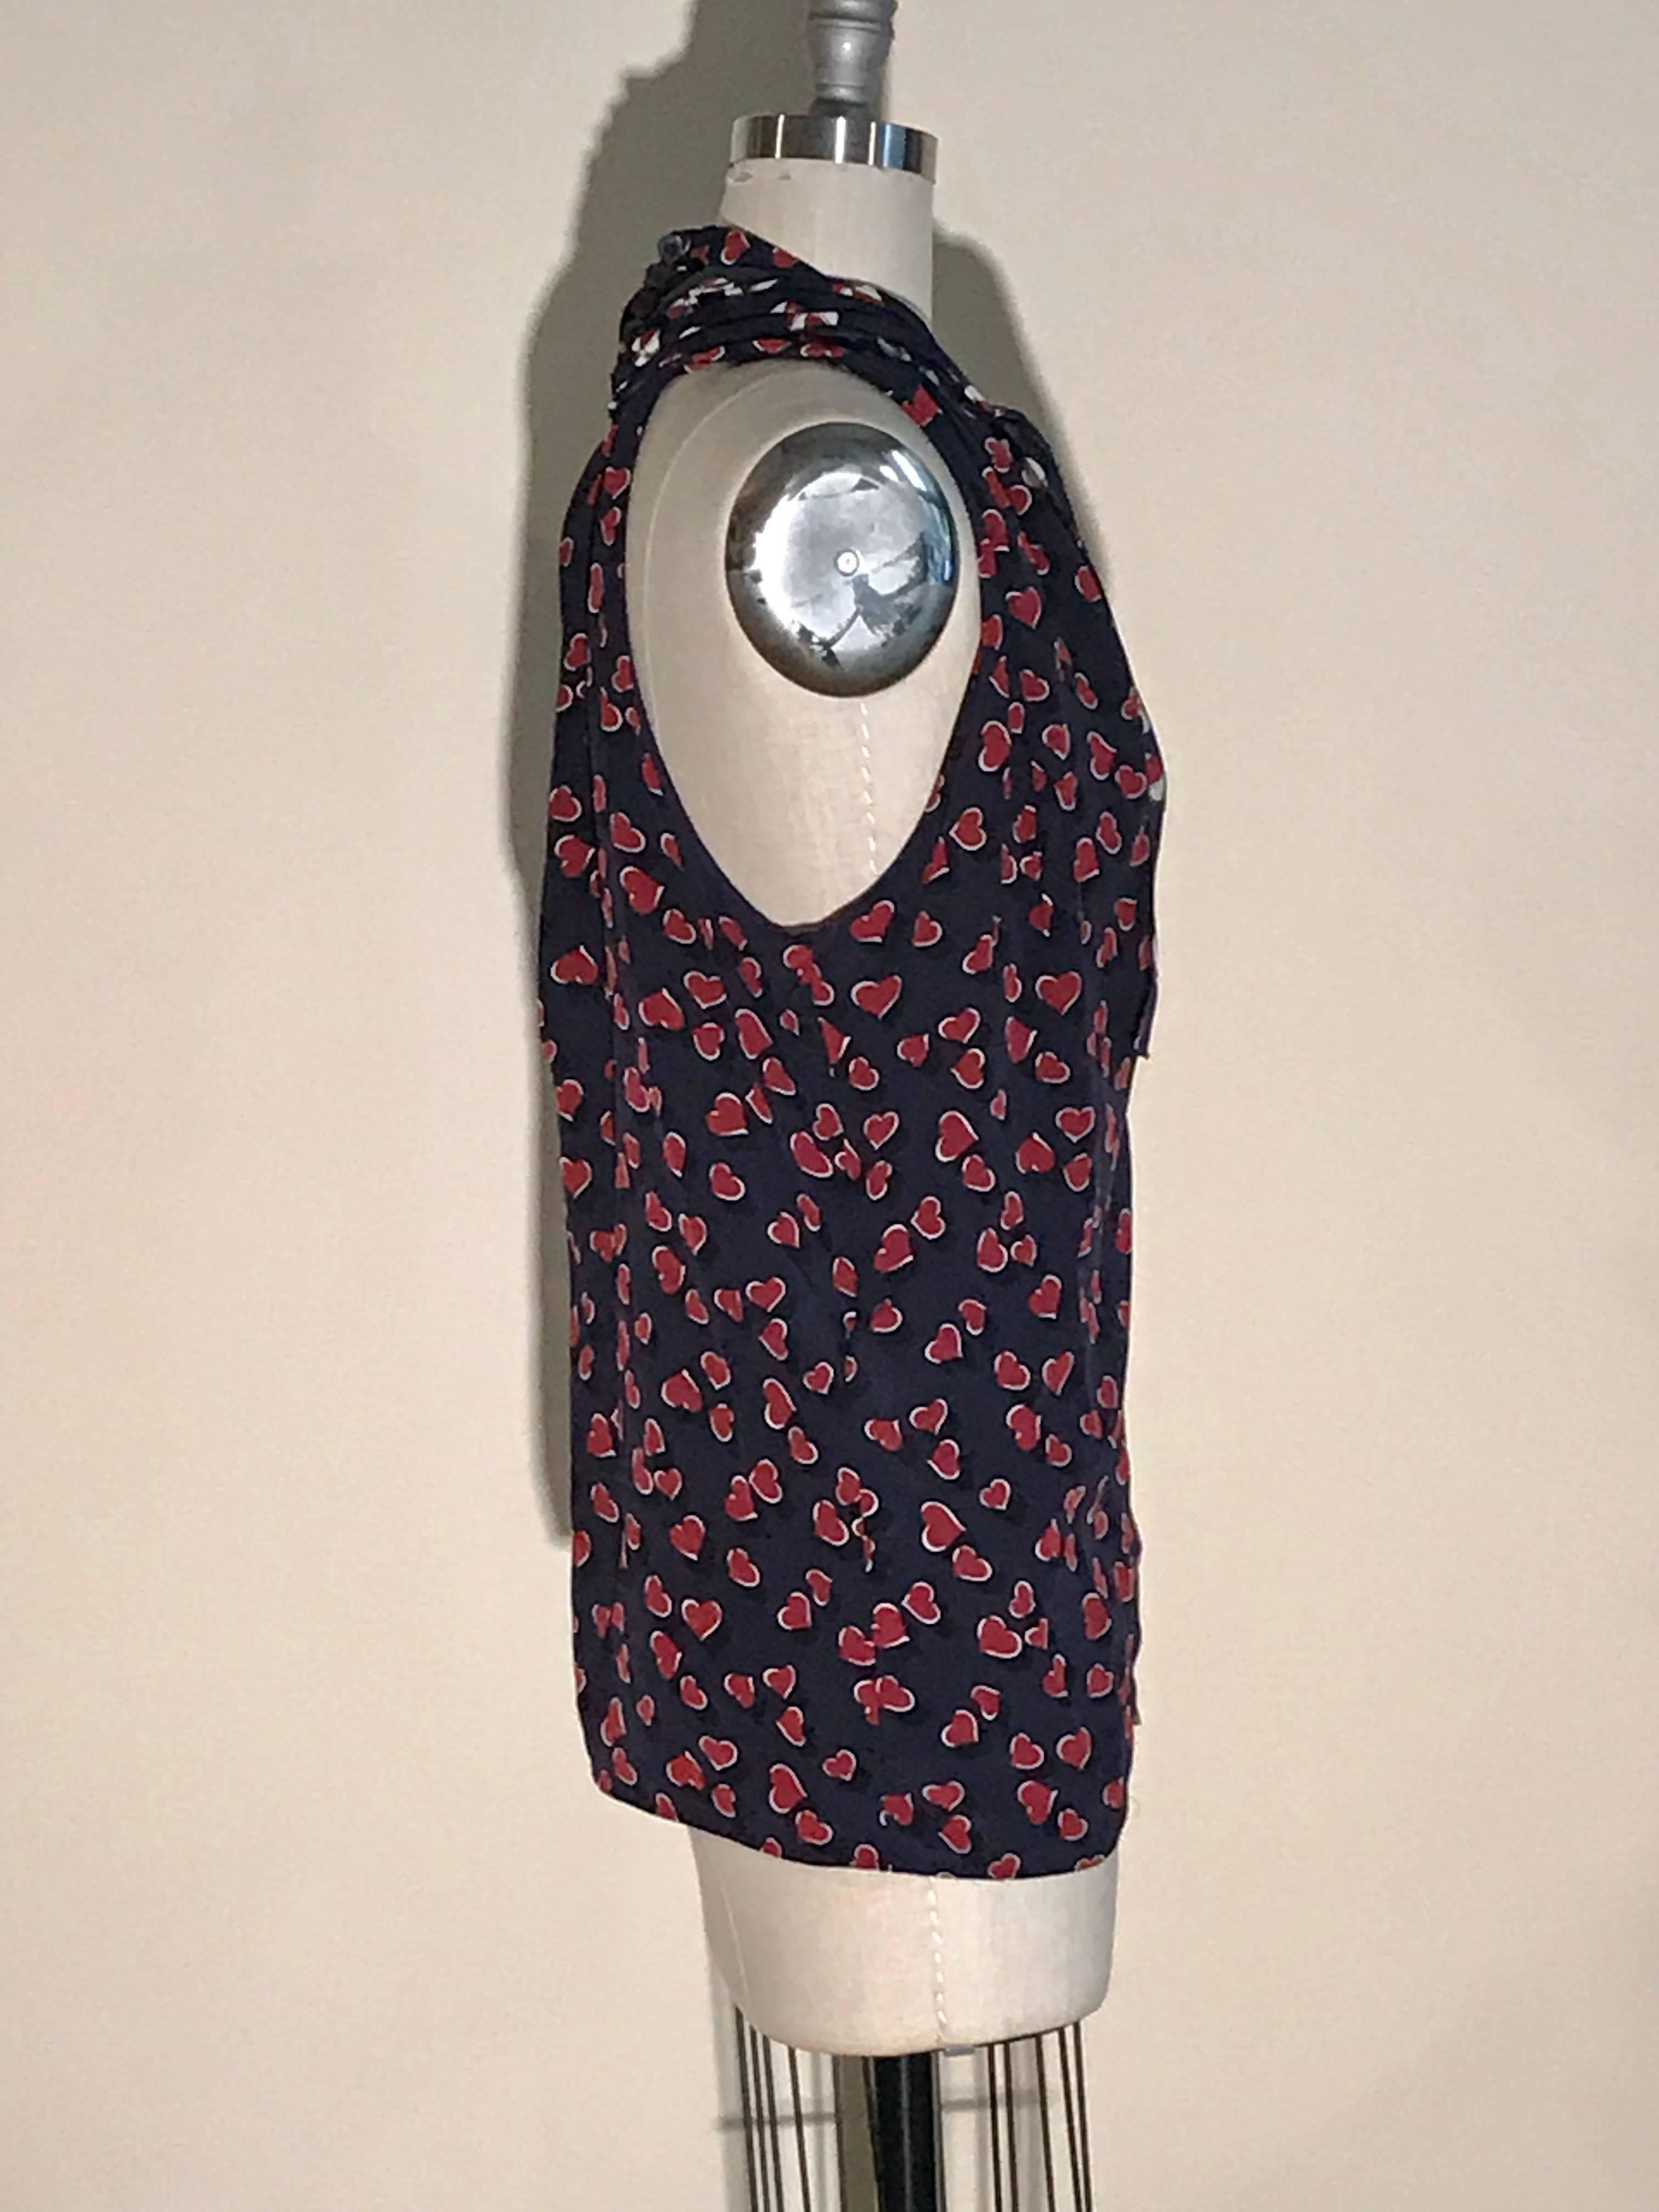 Gucci blue and red heart print silk top with beach ball print accent at neck. Deep V neck at front and slit at back with buttons at back neck. Scarf detail can be left open or tied however you'd like to style it. 

100% silk.

Made int Italy.

Size